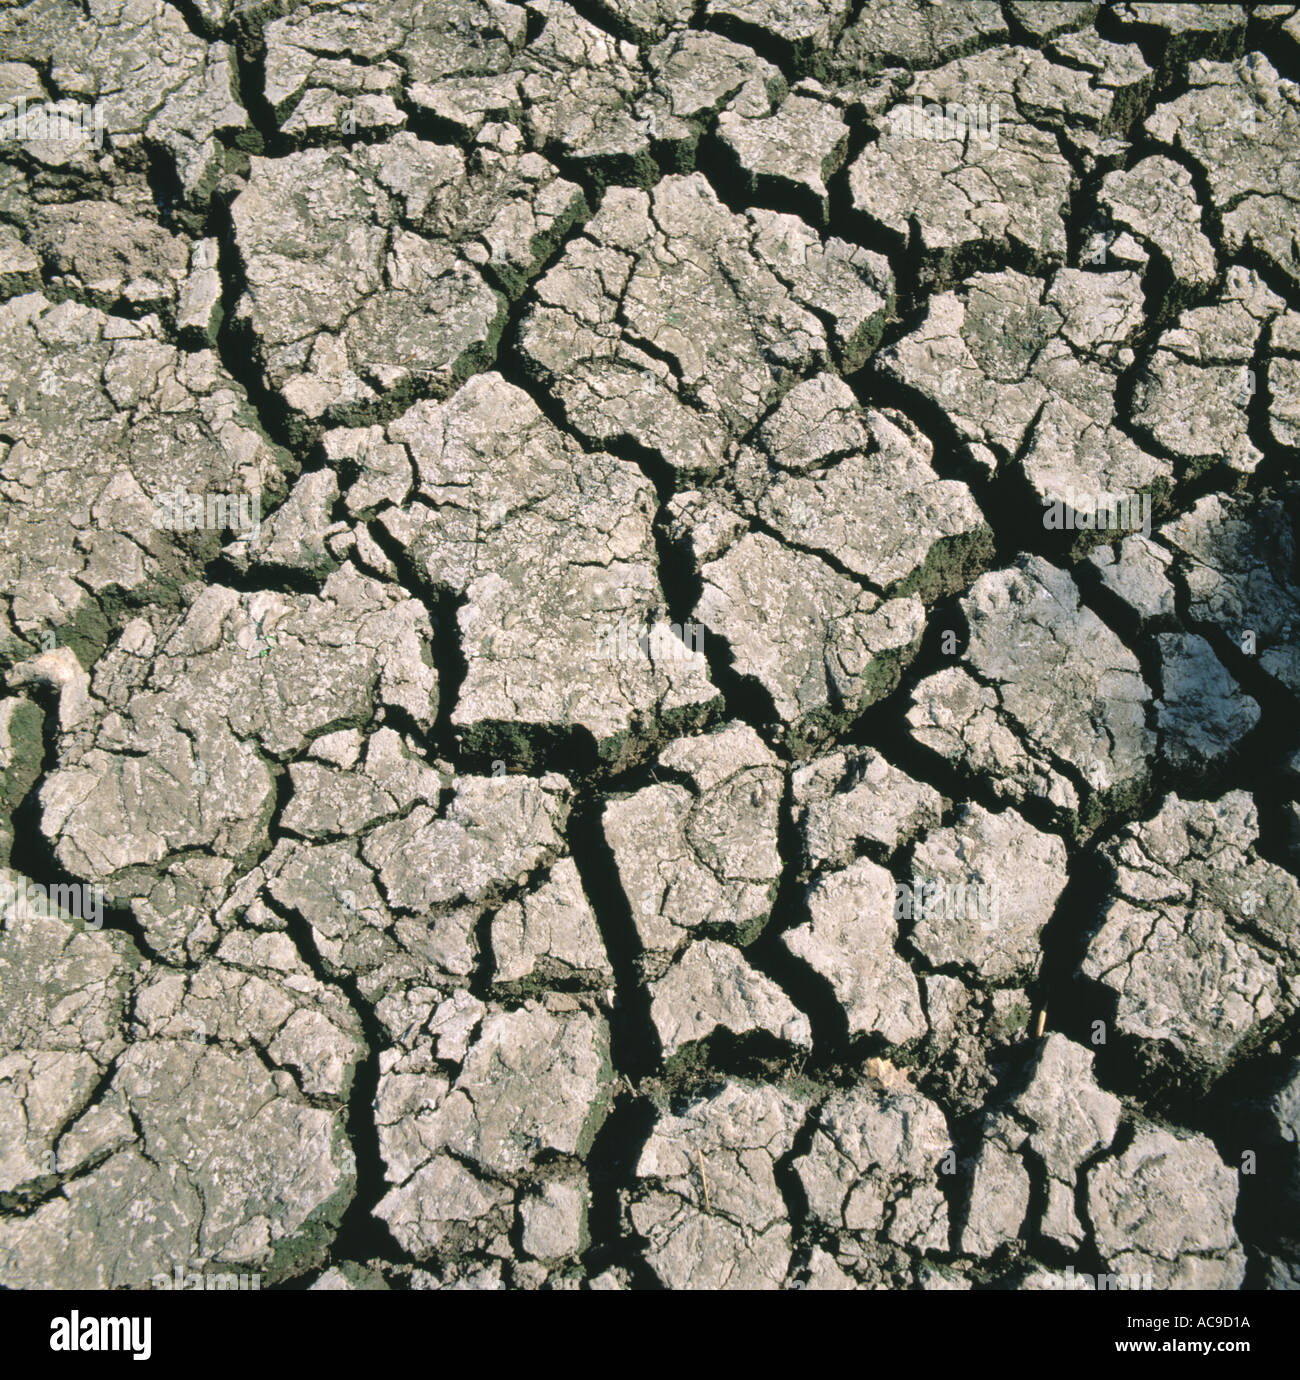 Dry and cracked soil drying out in a severe drought Stock Photo